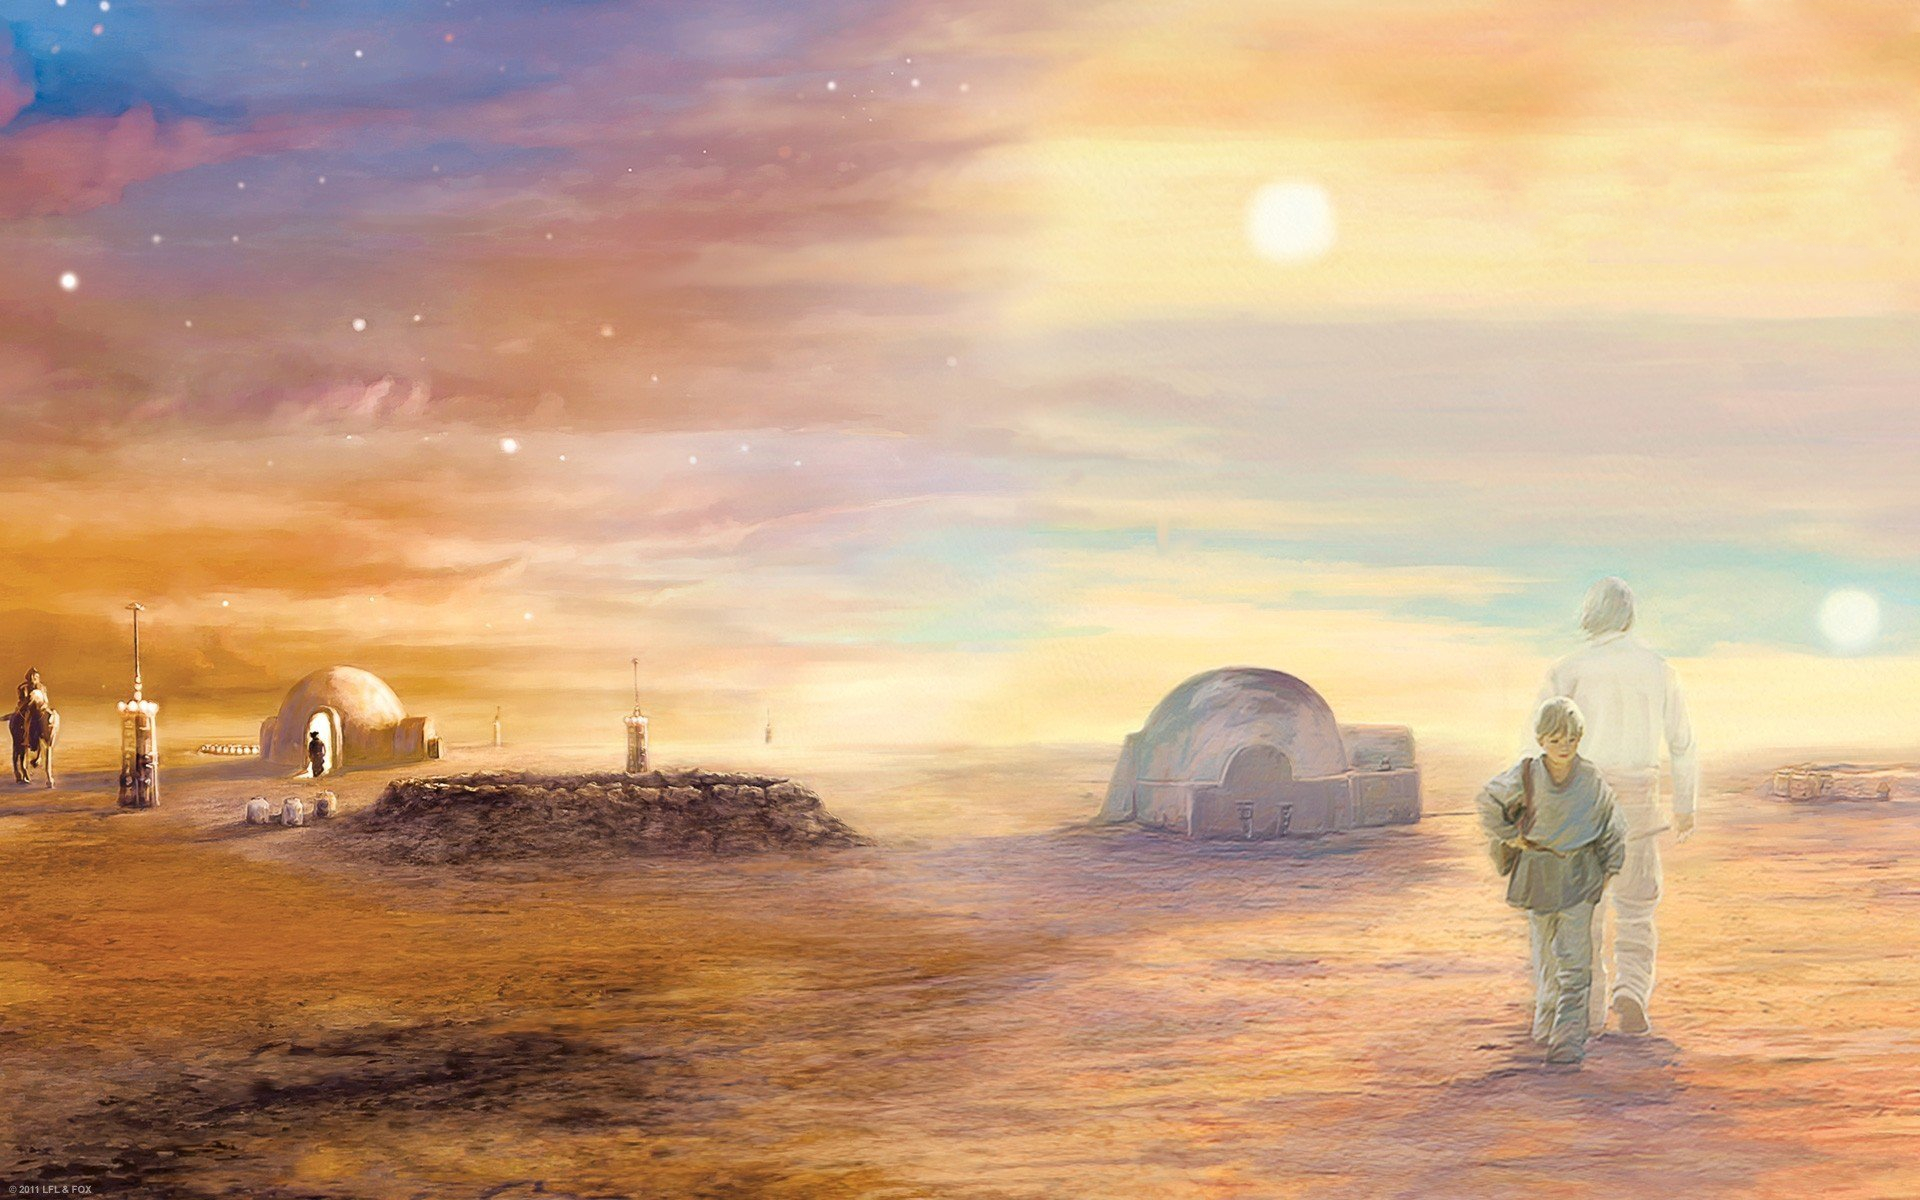 Tatooine (Star Wars) HD Wallpaper and Background